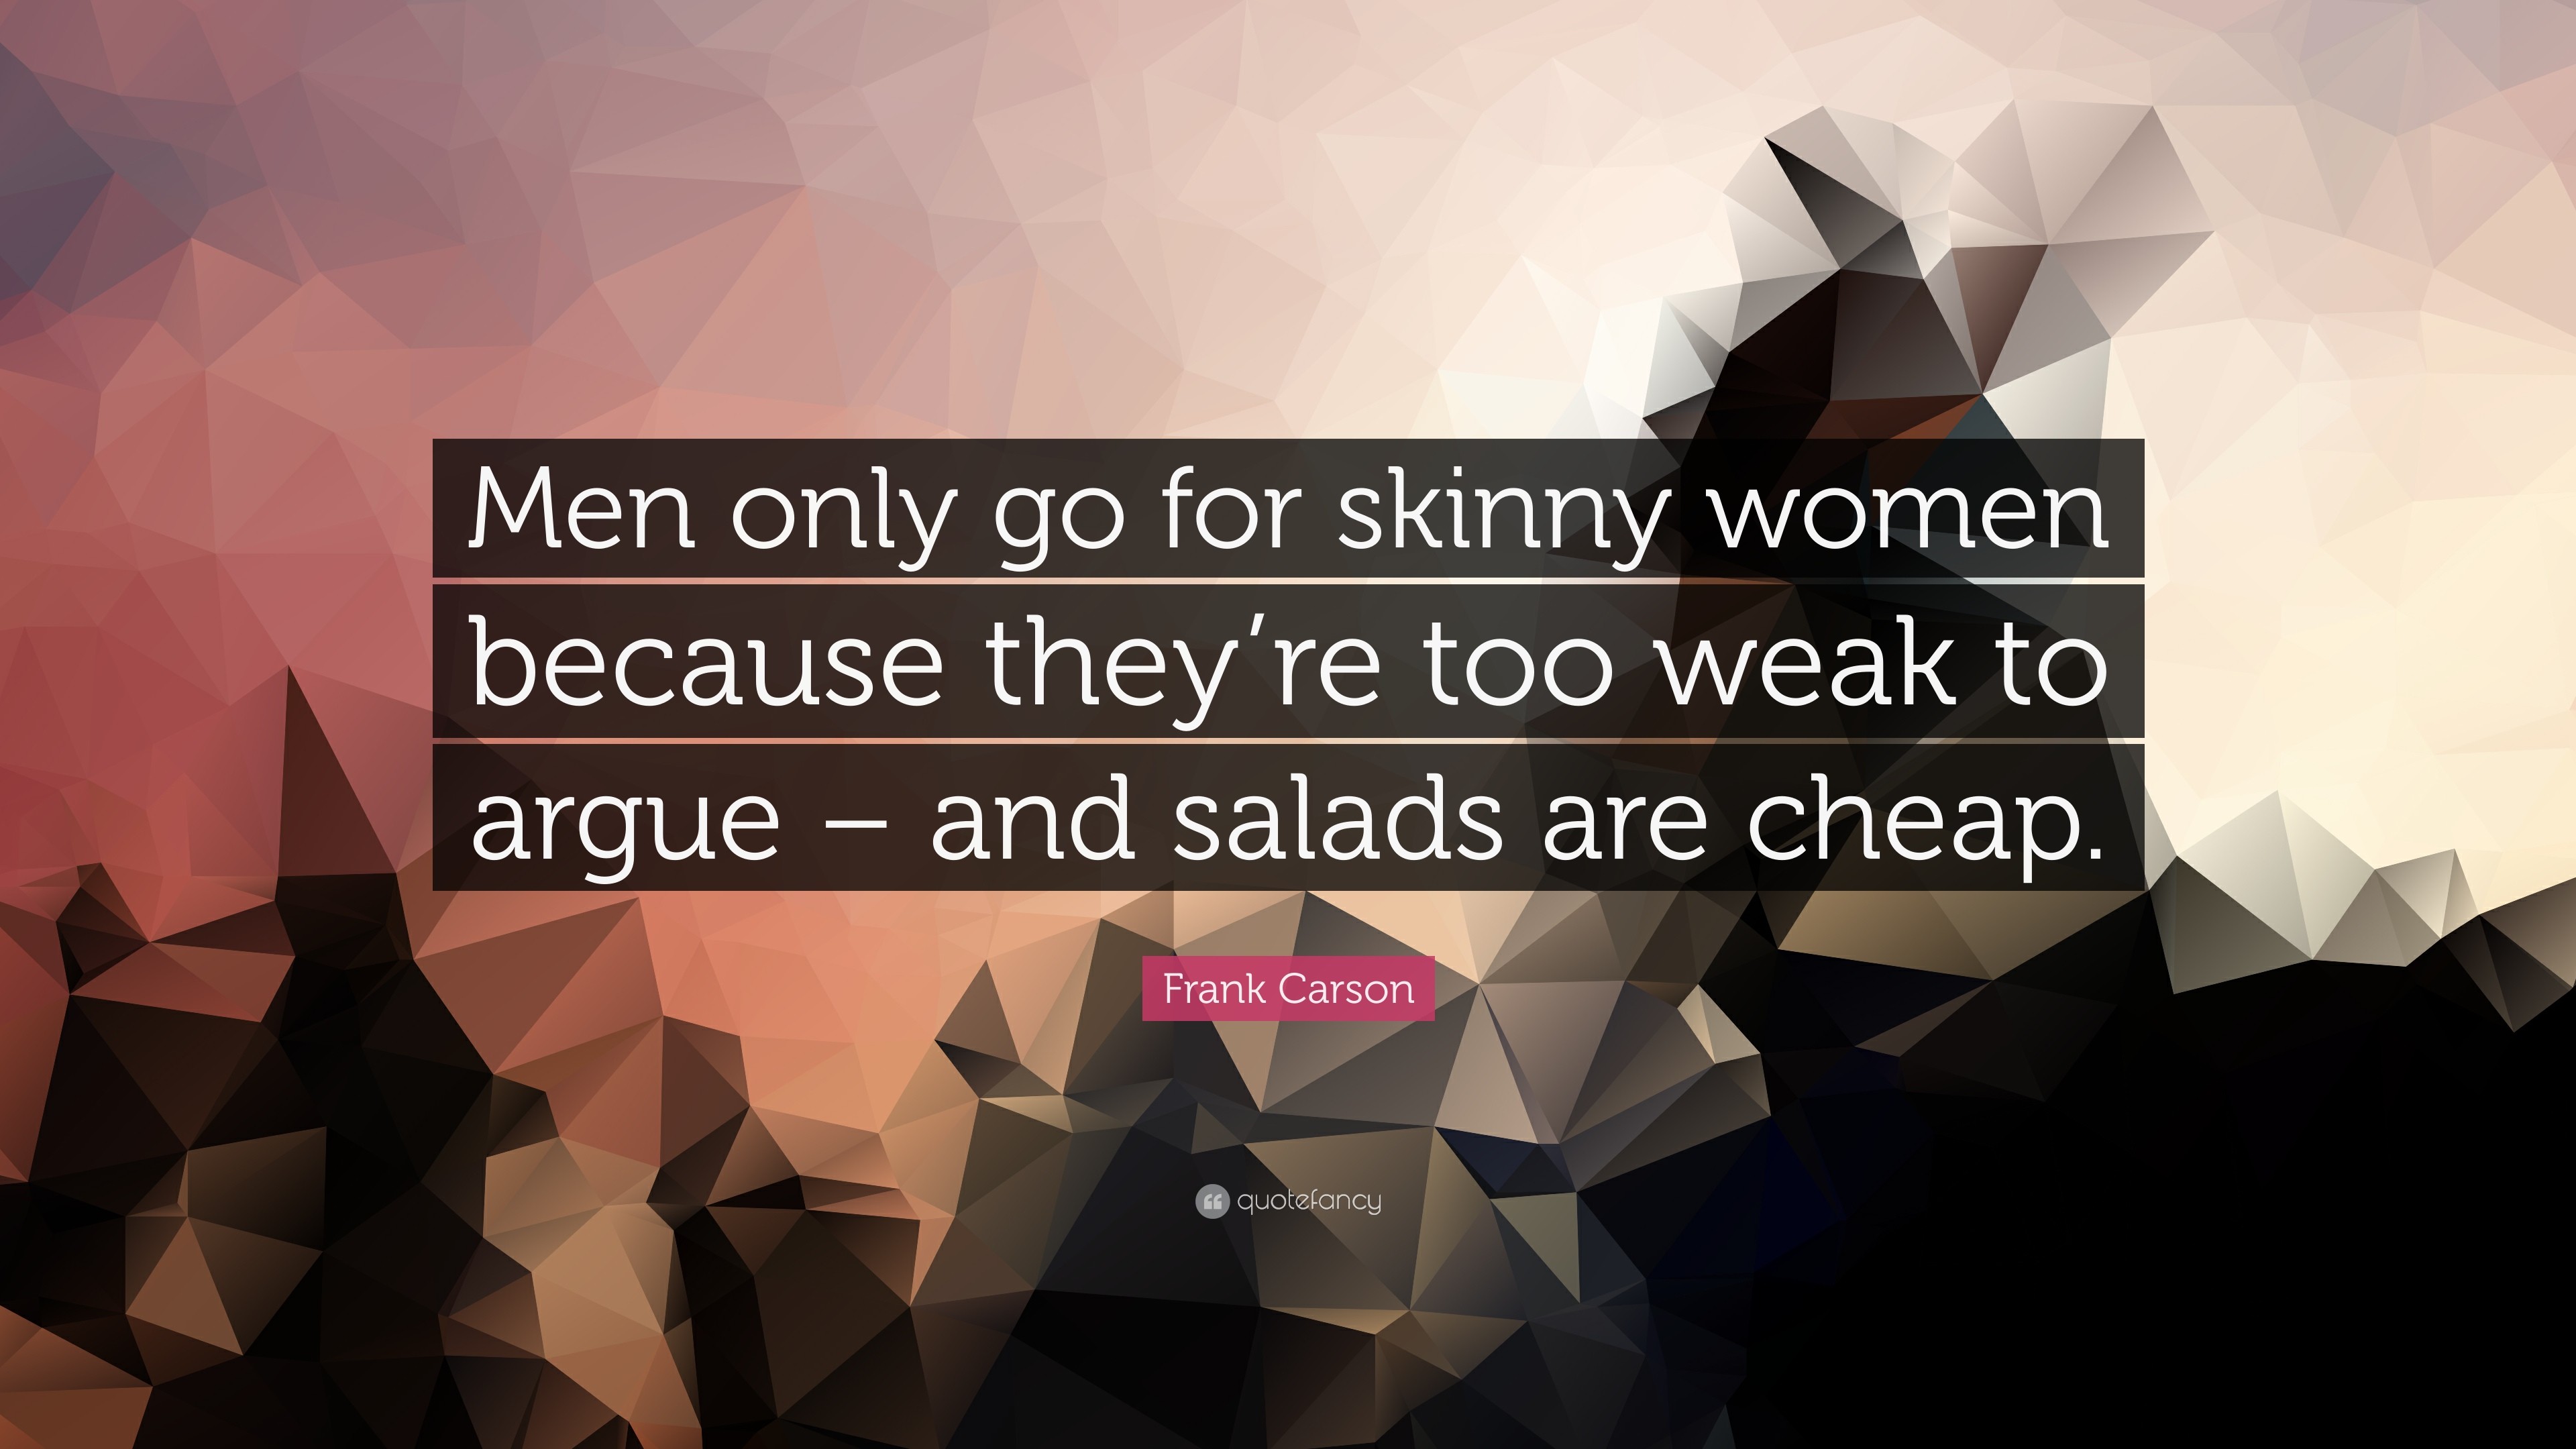 3840x2160 Frank Carson Quote: “Men only go for skinny women because they're too